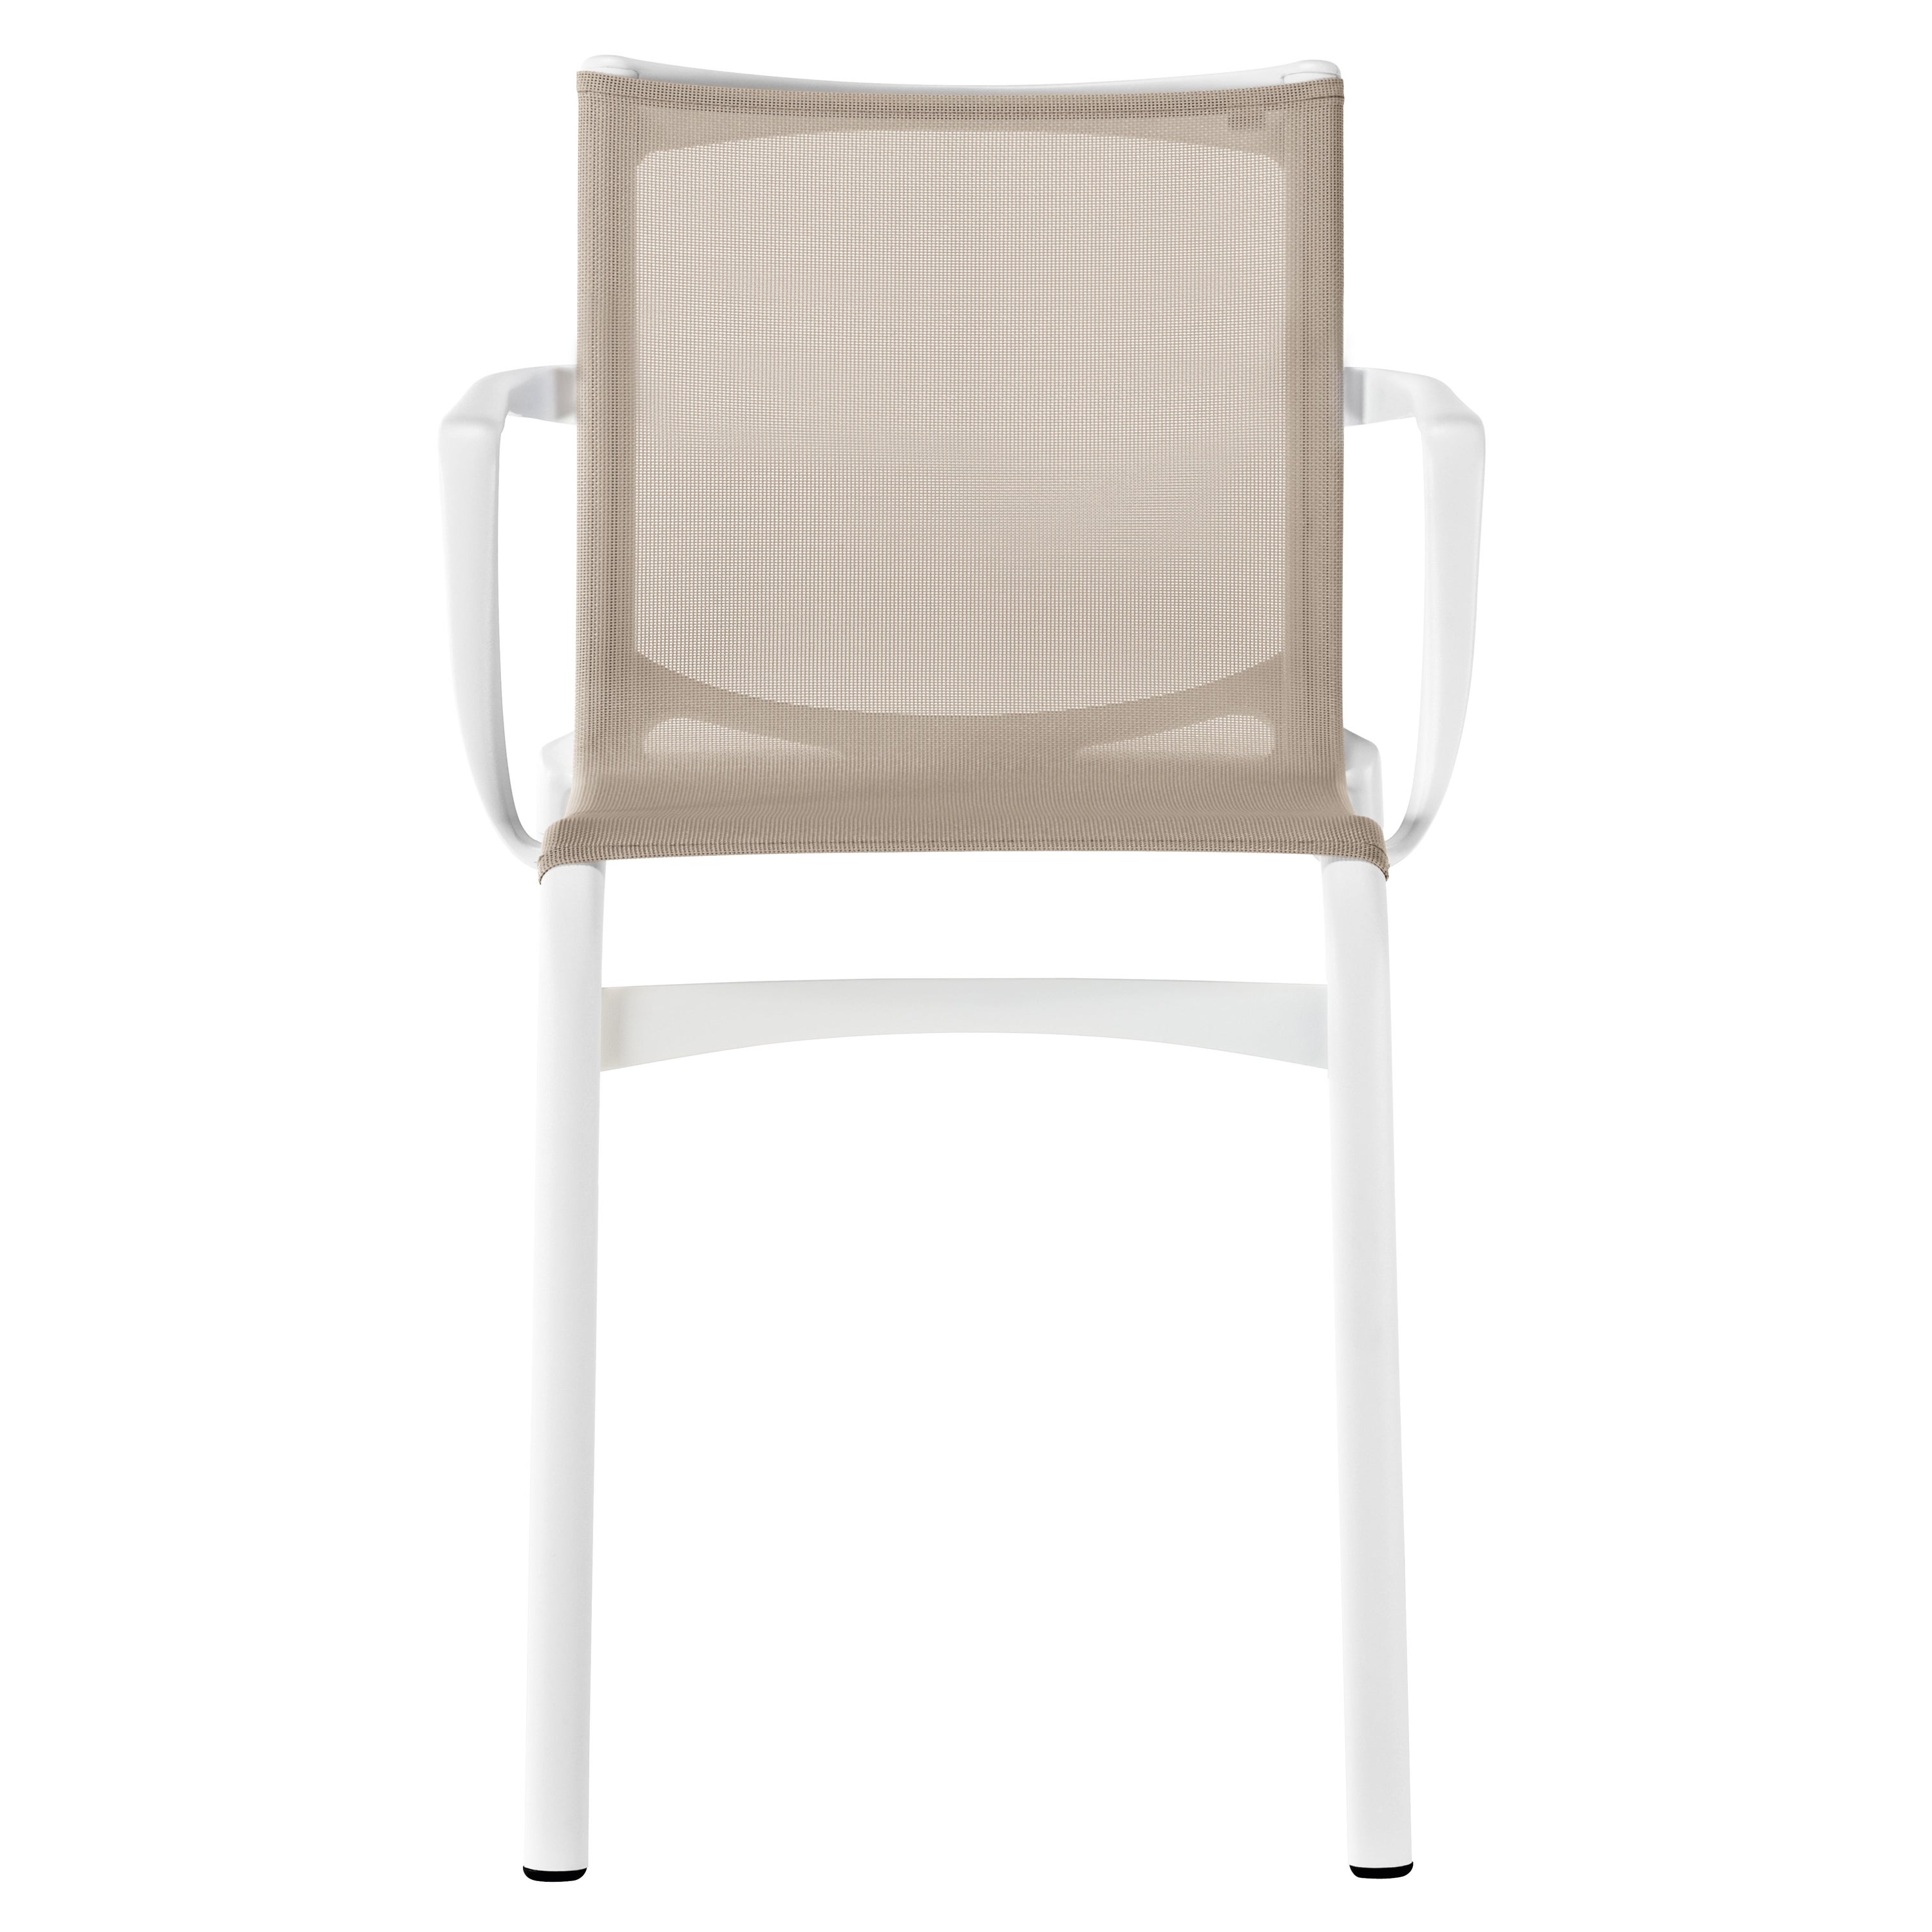 Alias 417 Highframe Outdoor Chair in Sand Mesh with Lacquered Aluminium Frame For Sale